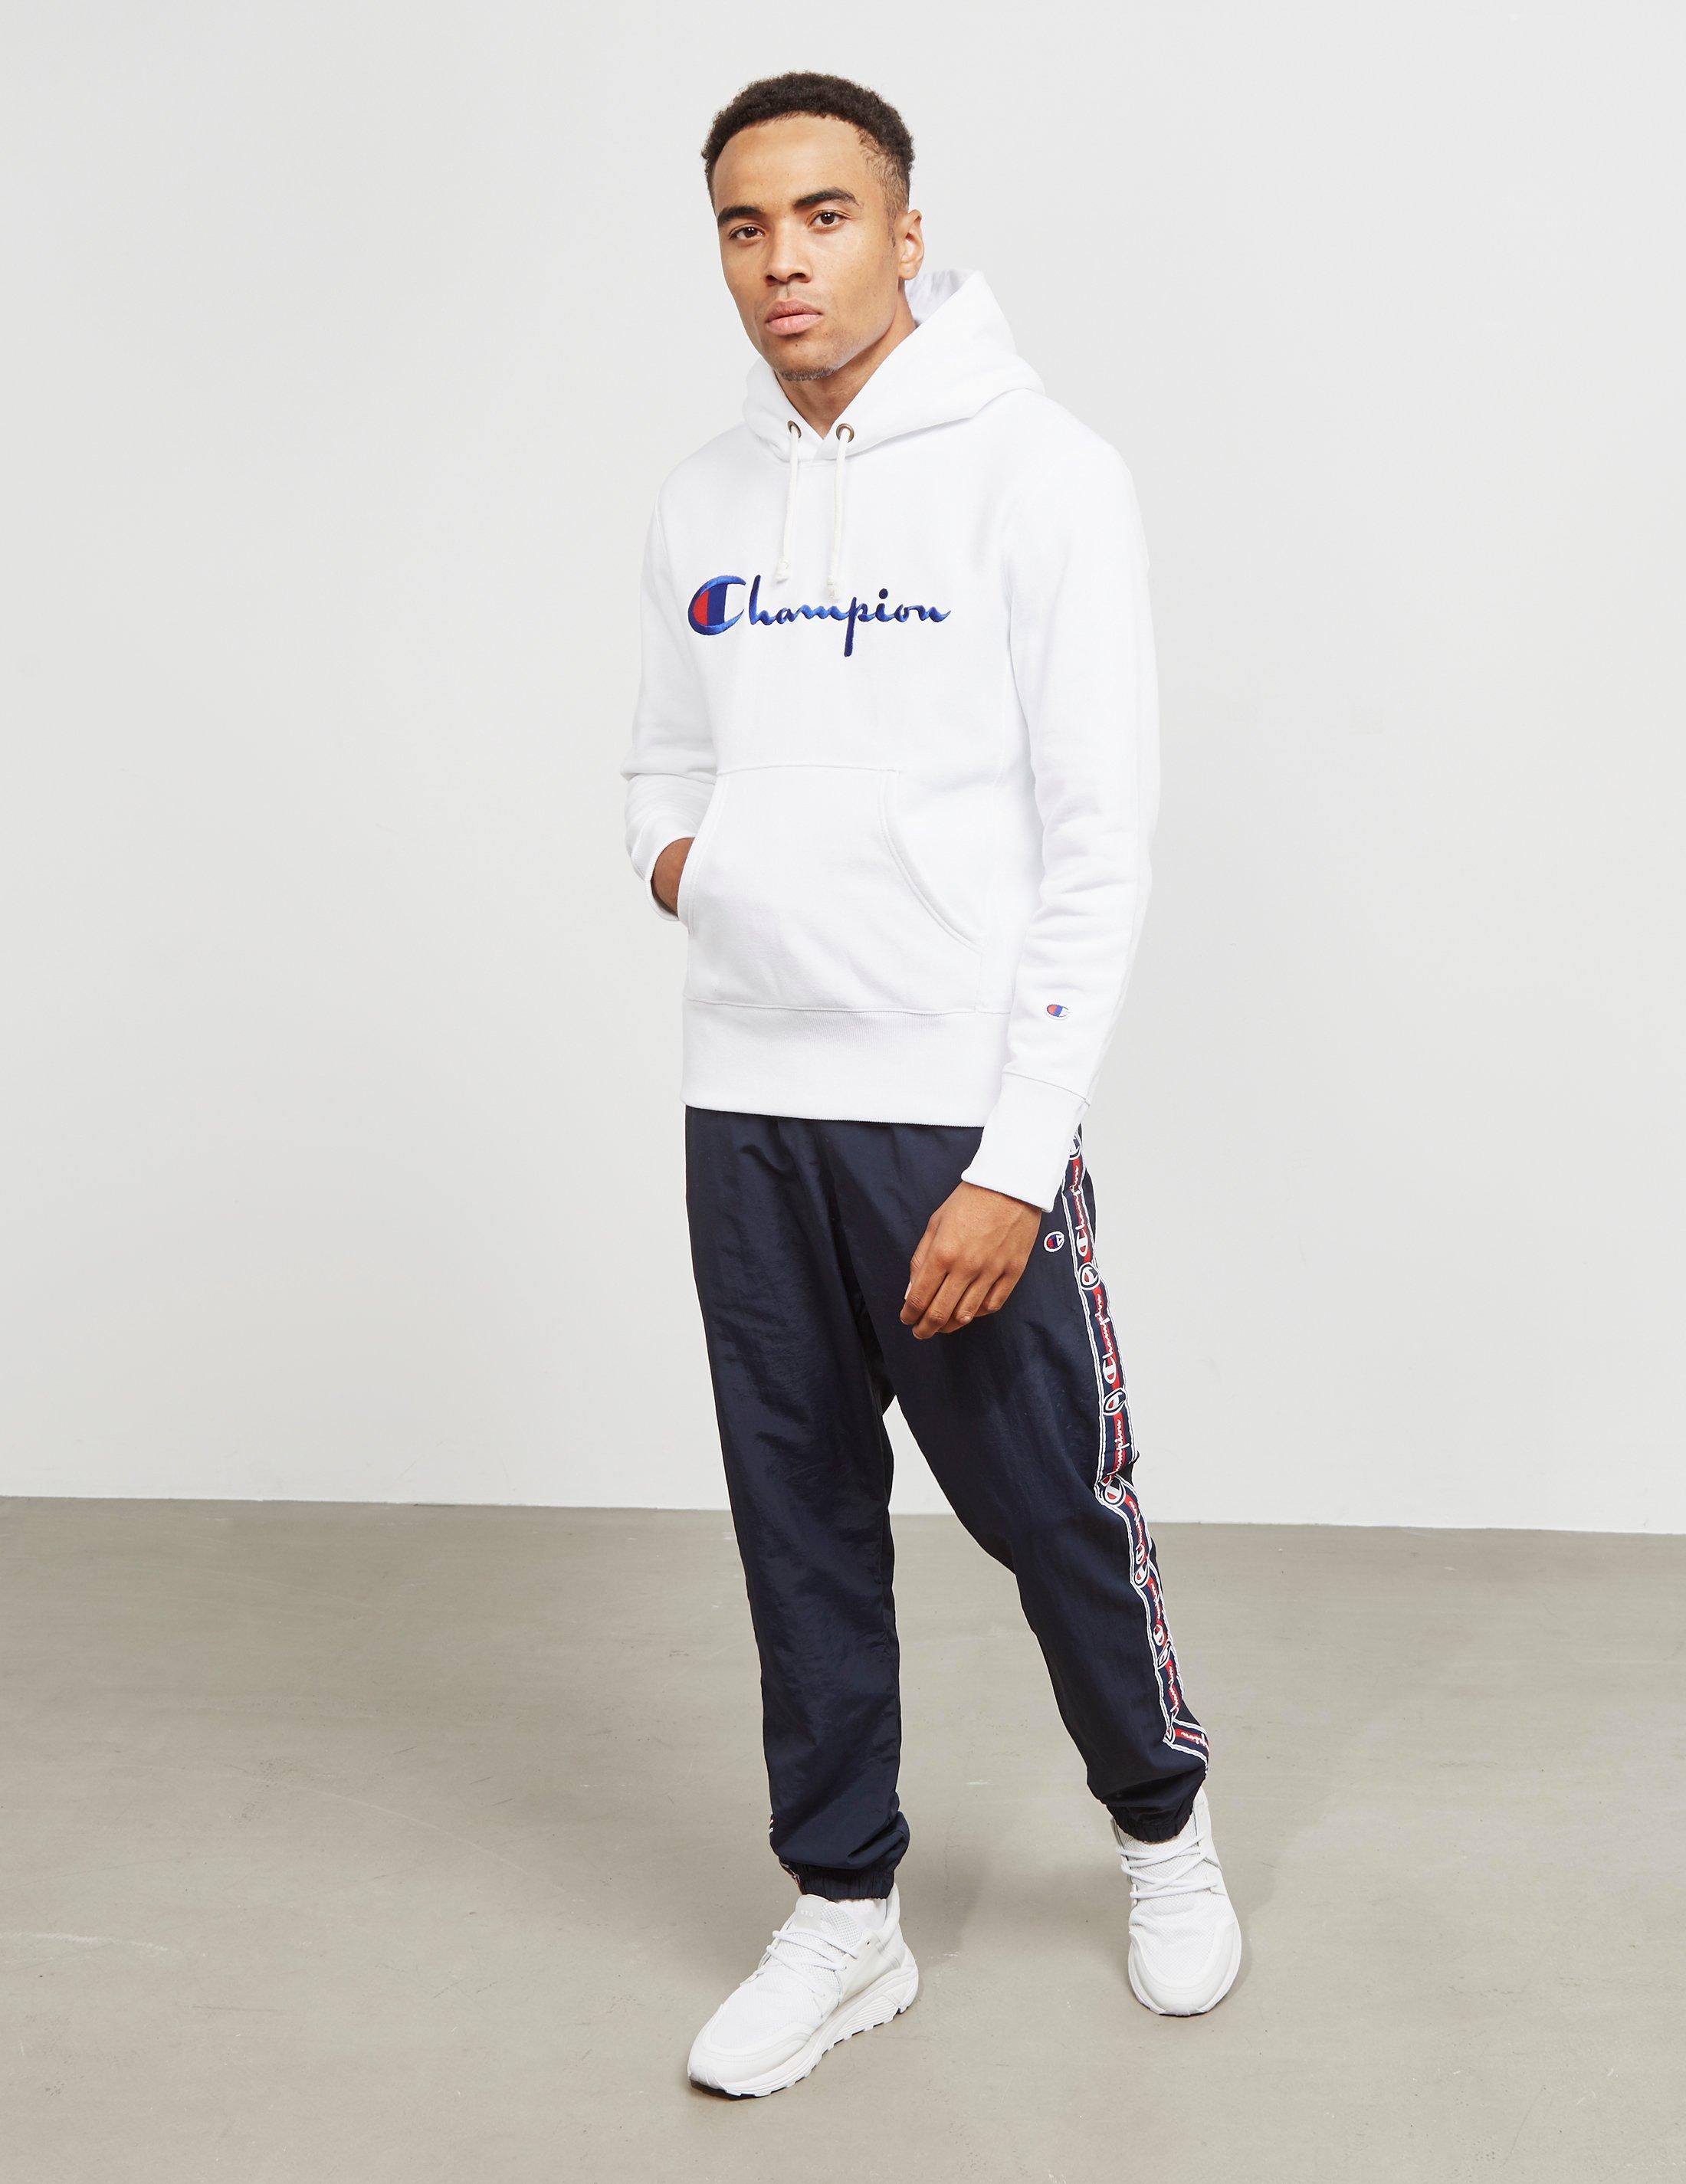 champion outfit for men